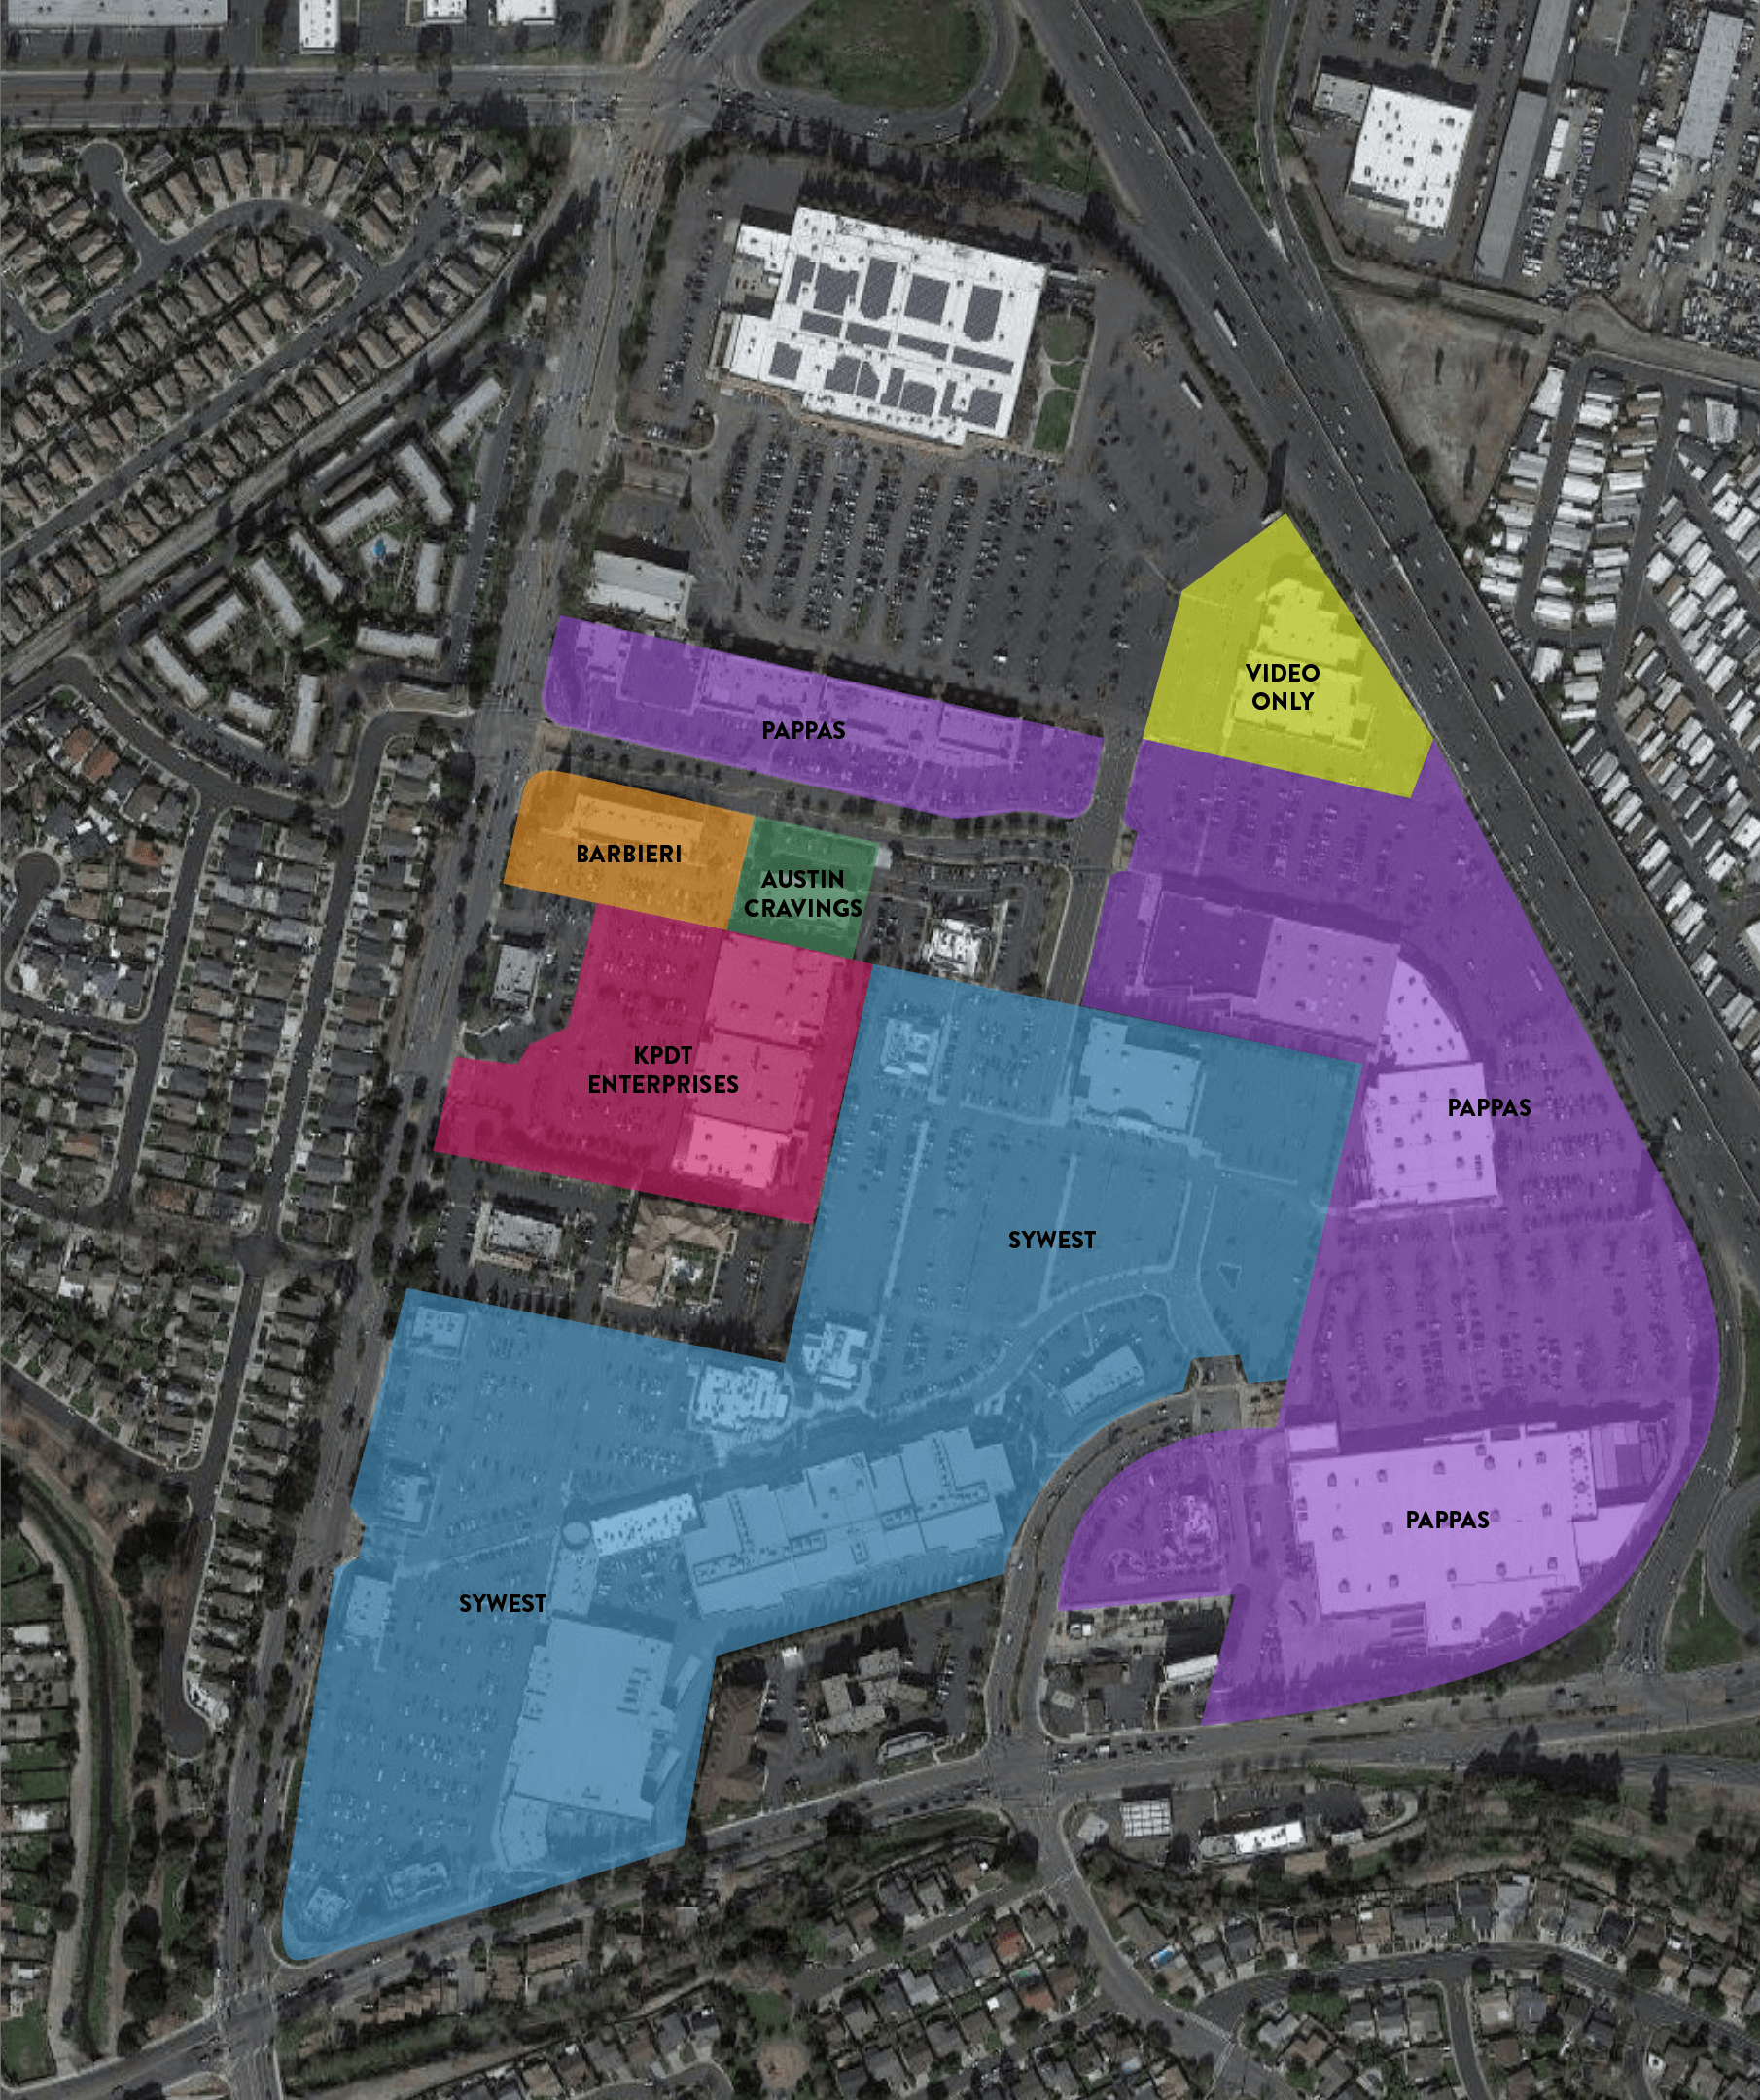 An ariel view of the Union Landing shopping center with the stores numbered for the directory.